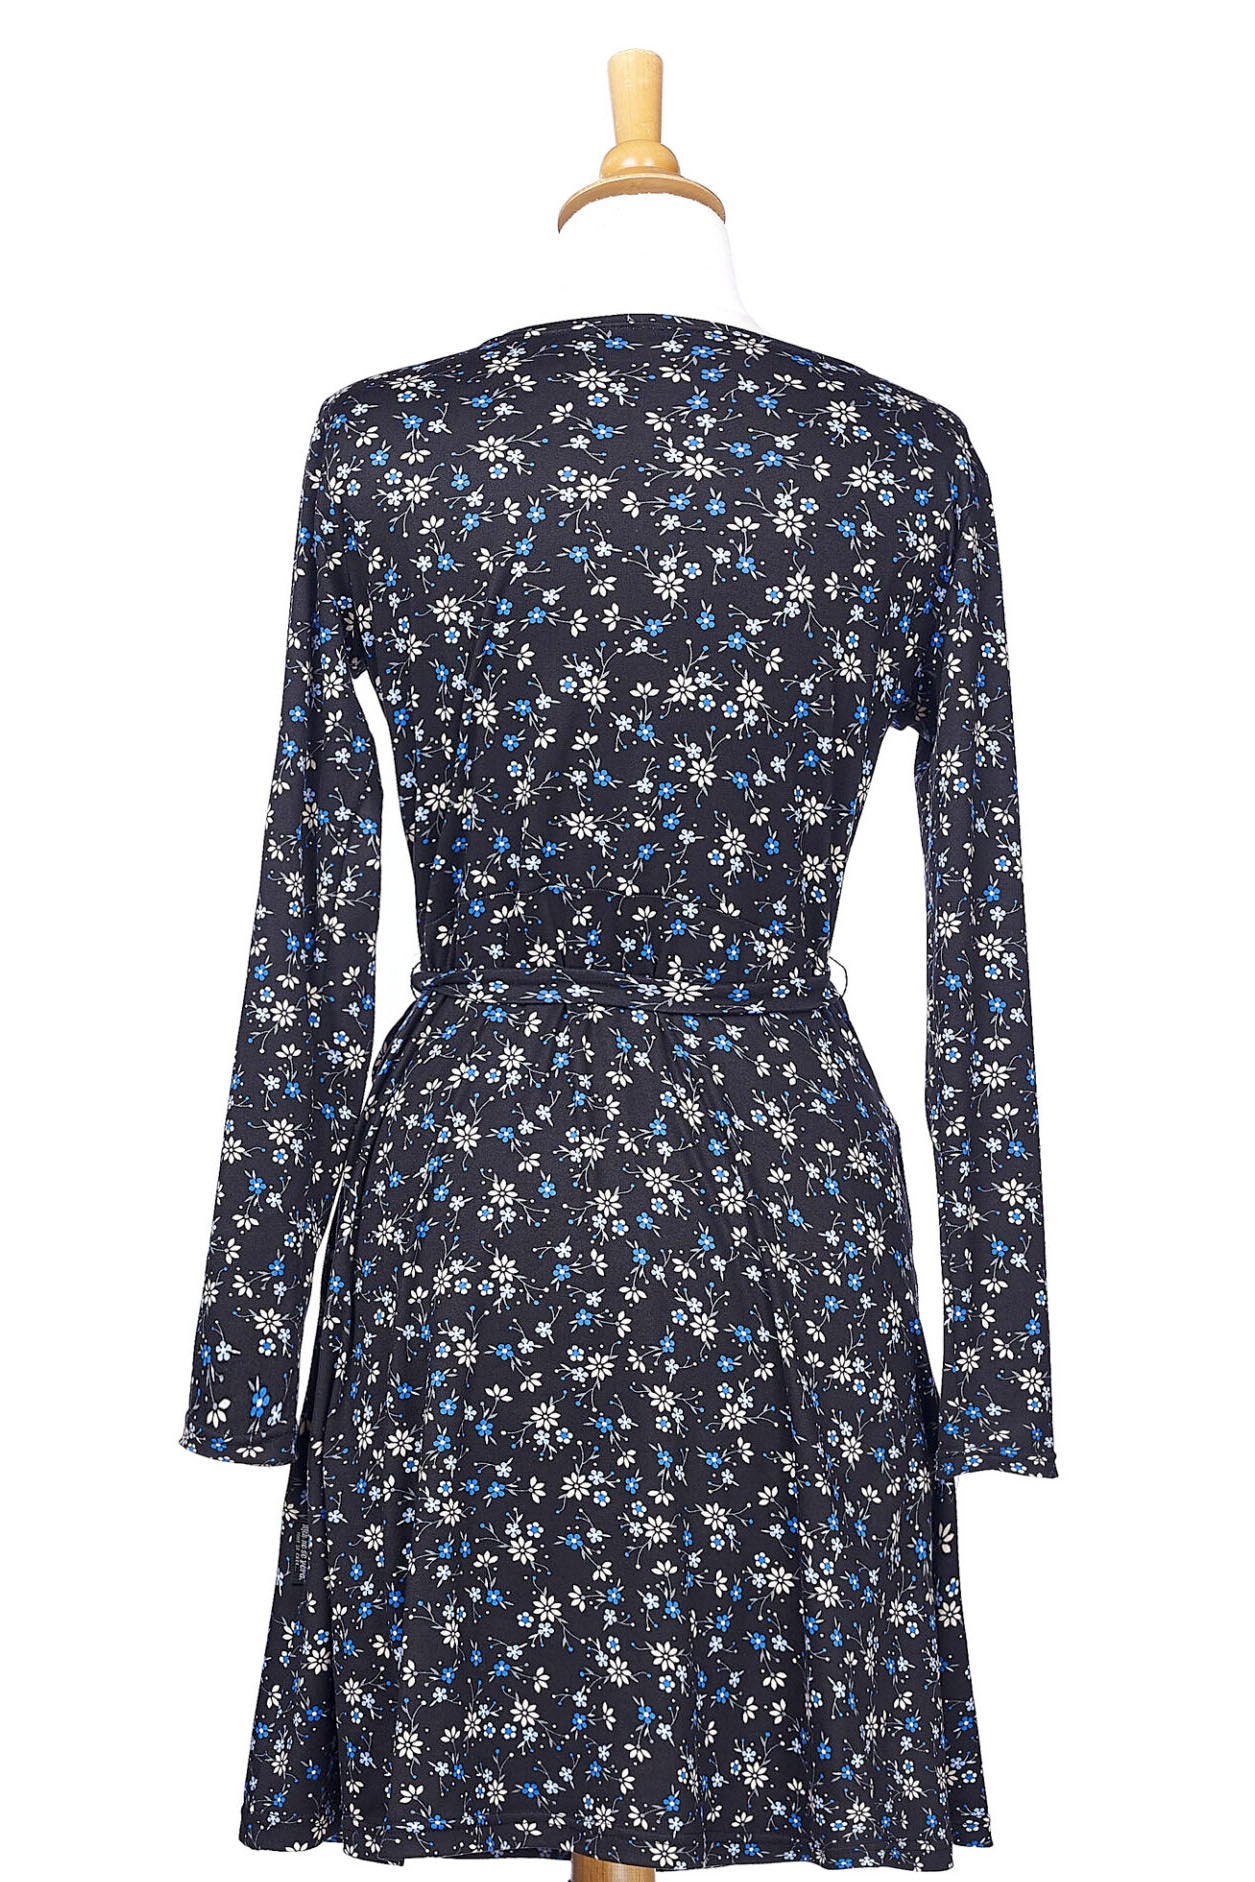 Ste-Anne Dress by Rien ne se Perd, Blue, back, floral, faux-wrap dress, tie belt, pleats at shoulders, fit and flare, sizes XS to XXL, made in Quebec